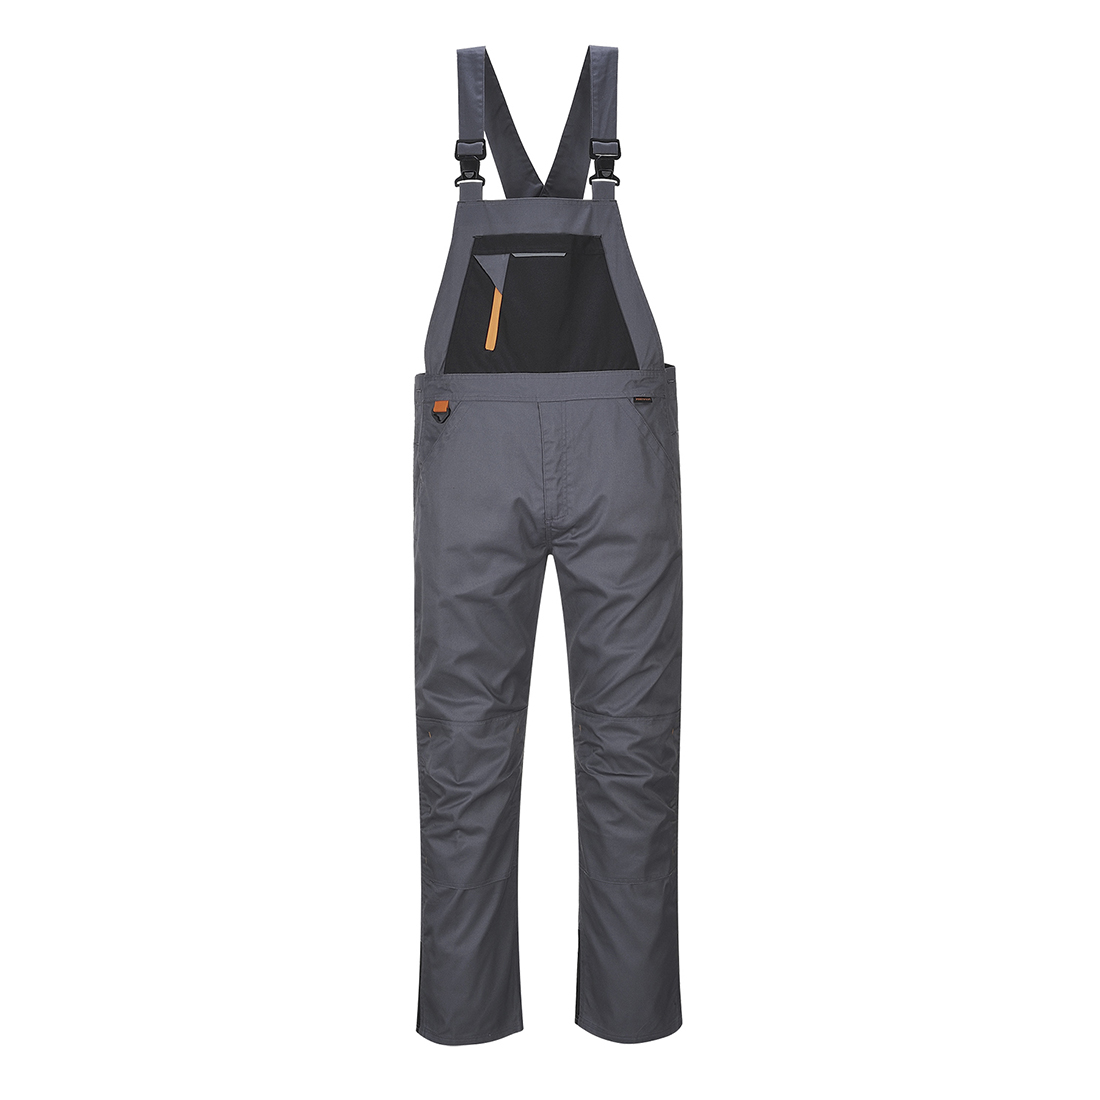 Portwest-Burnley Workwear Bib and Brace Dungarees Overall Combinaison